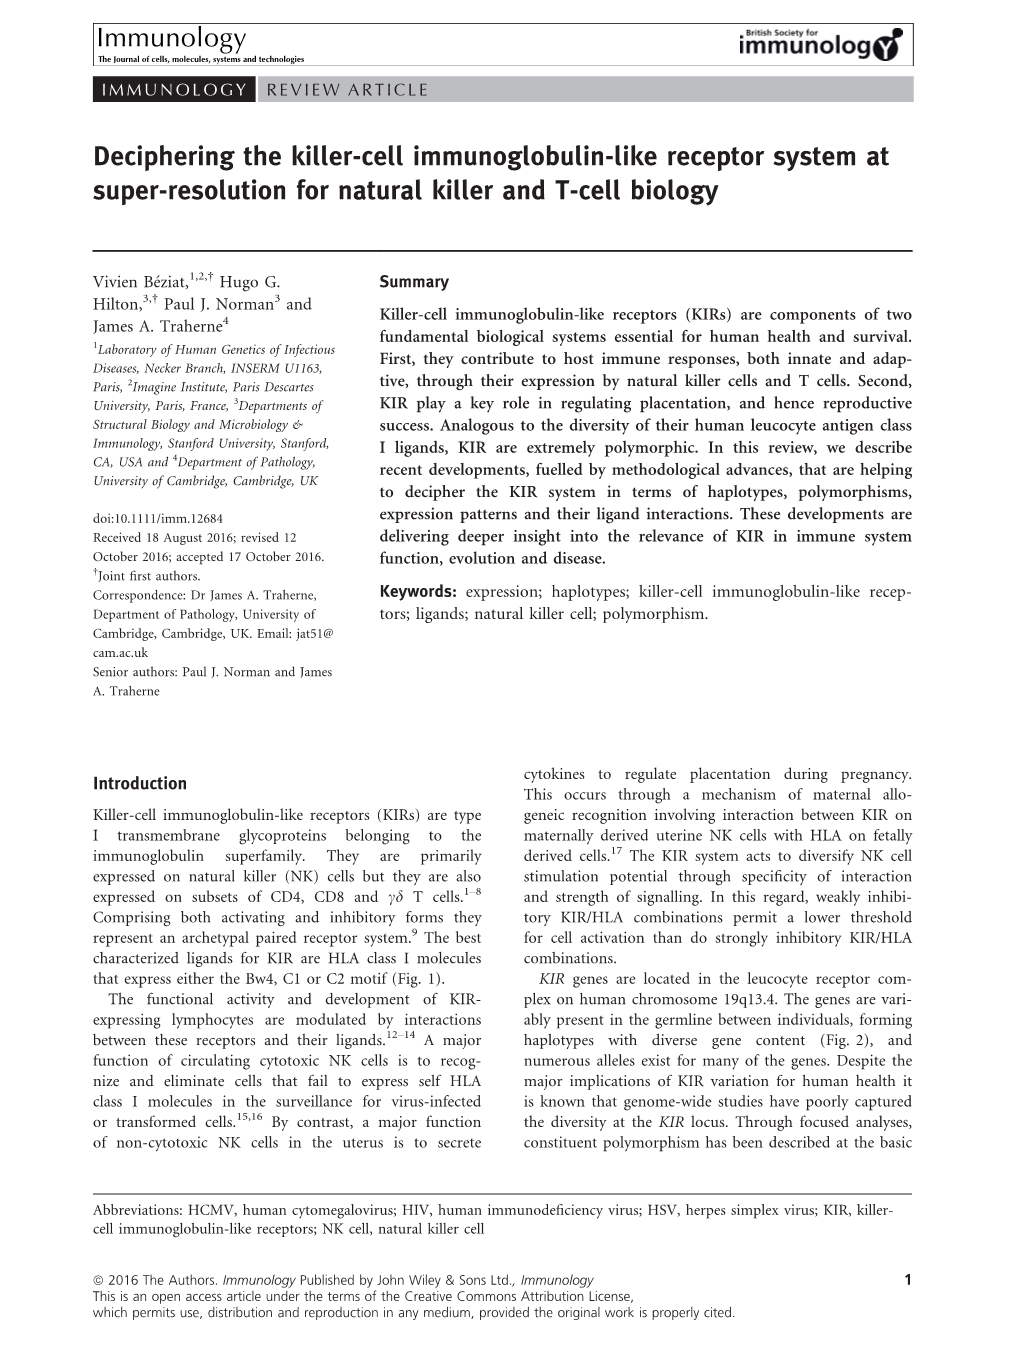 Like Receptor System at Super&#X2010;Resolution for Natural